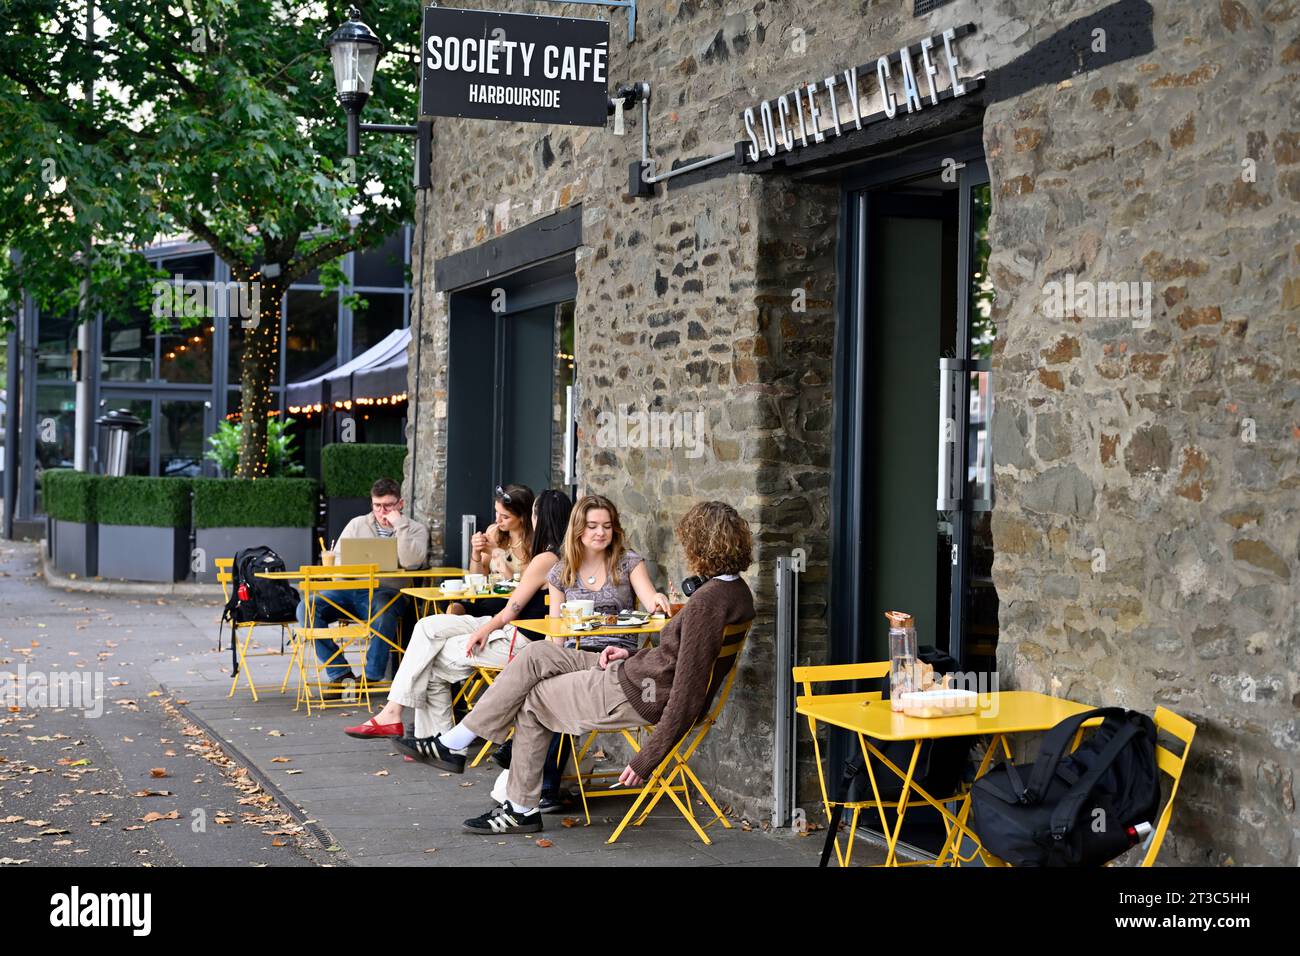 Outside the Society Cafe on Narrow Quay, Bristol, UK with dinners on pavement tables Stock Photo